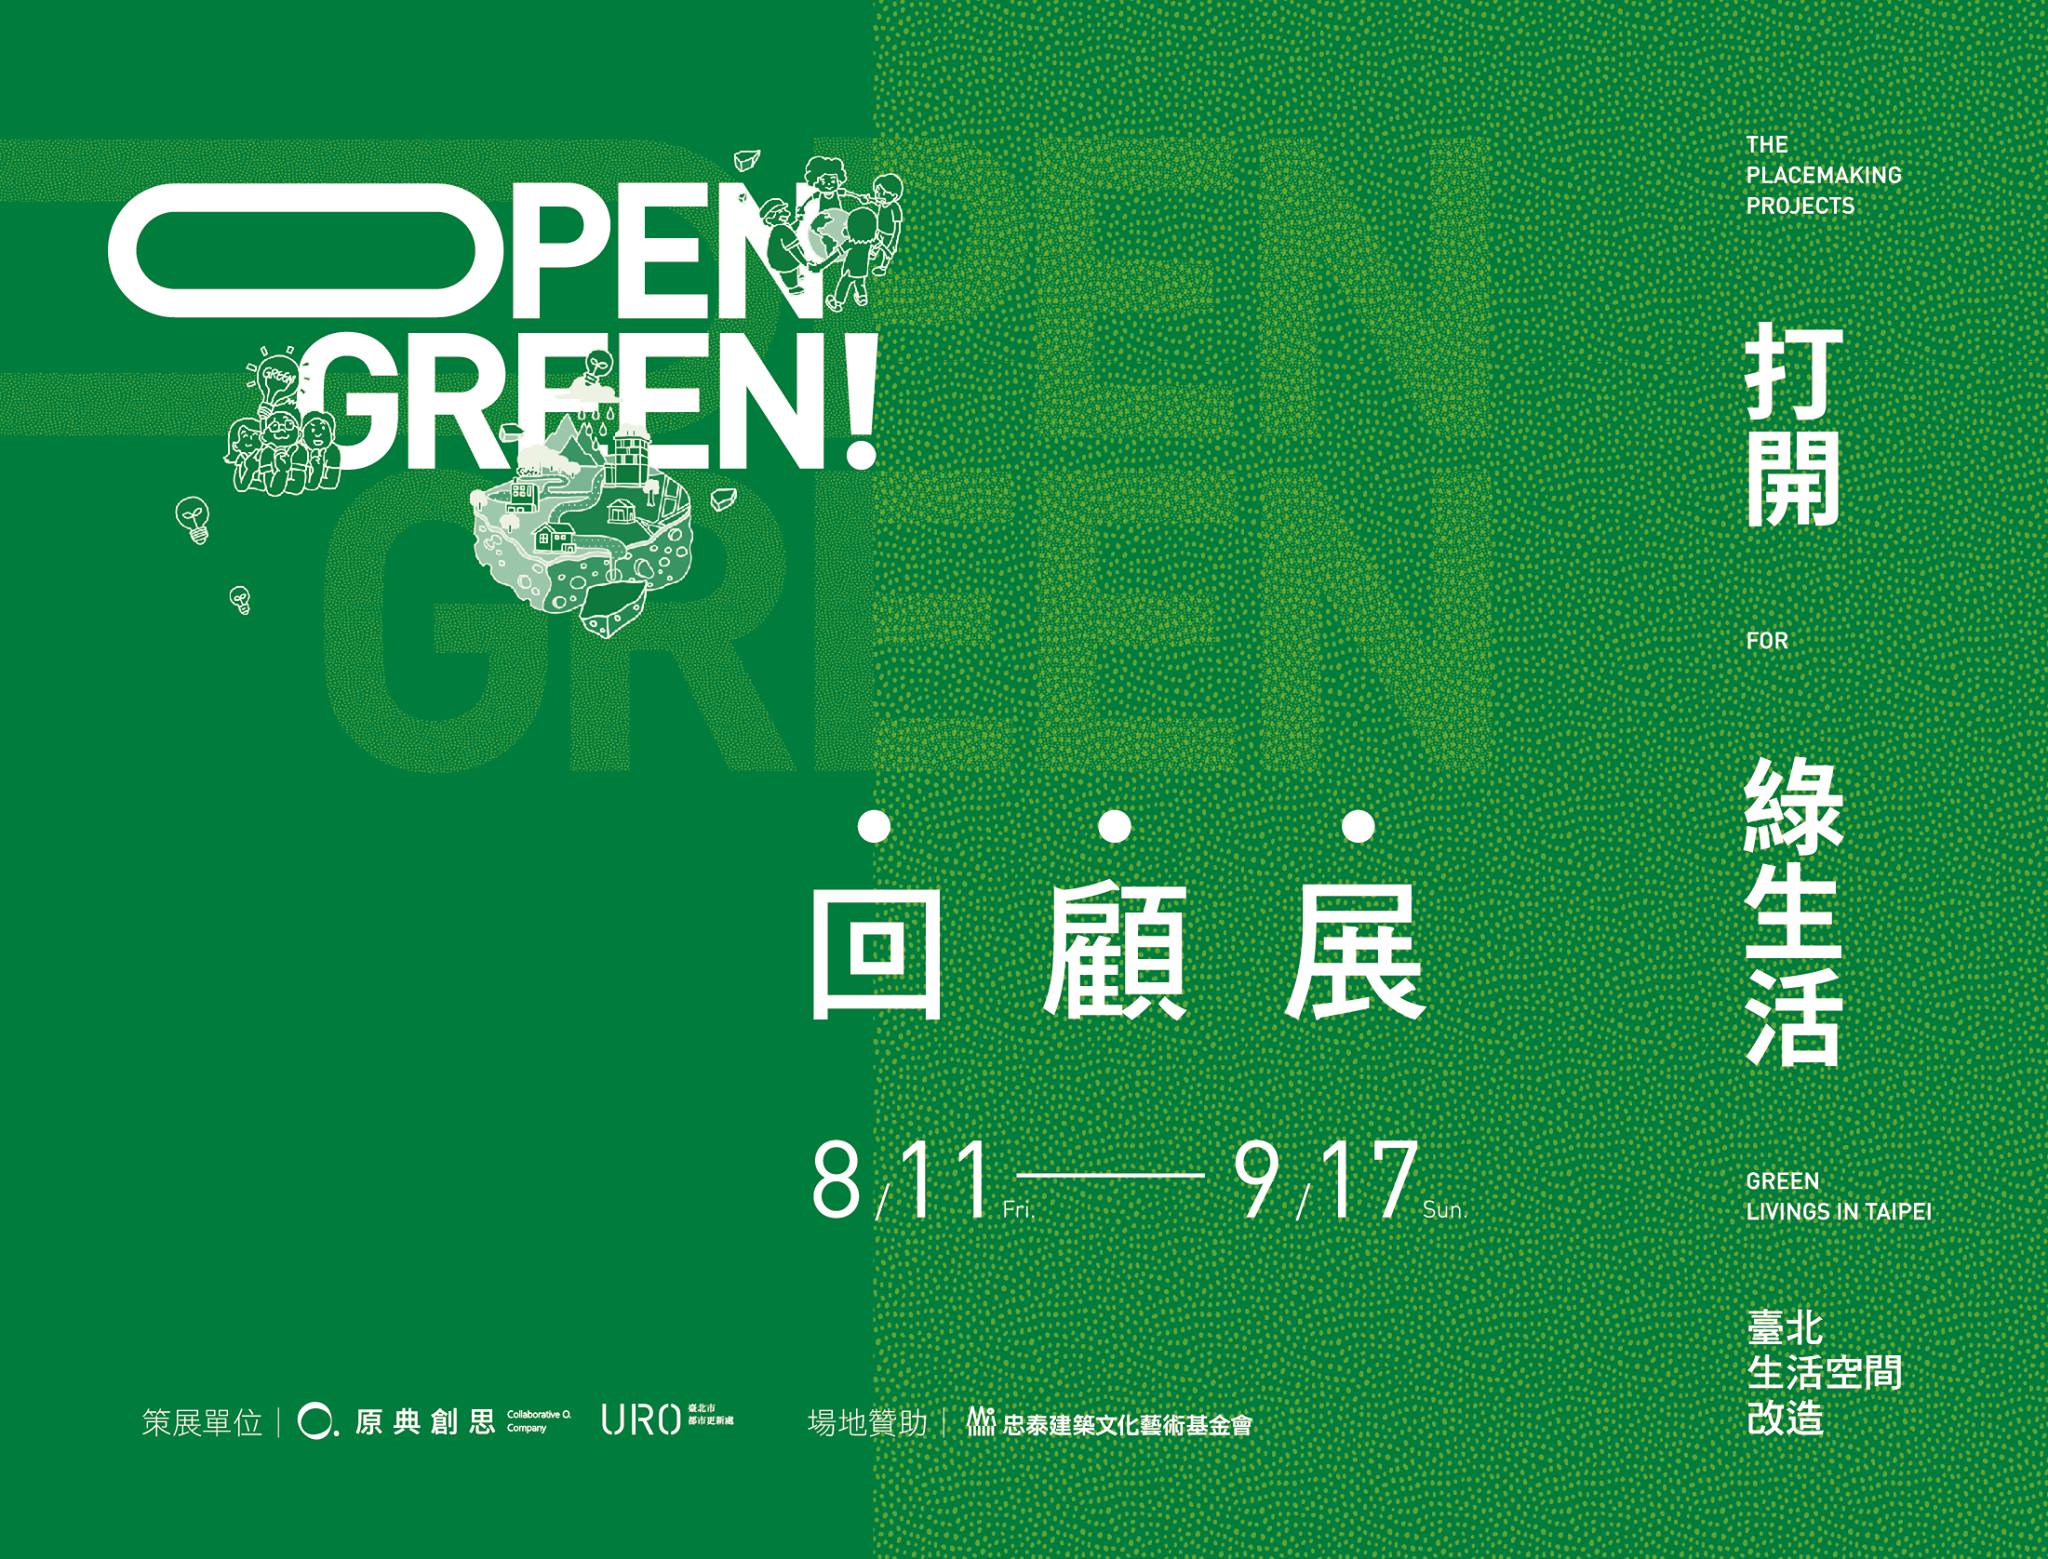 [Guest Exhibition] An Introspective Exhibition of the Place Making Projects for Green Livings